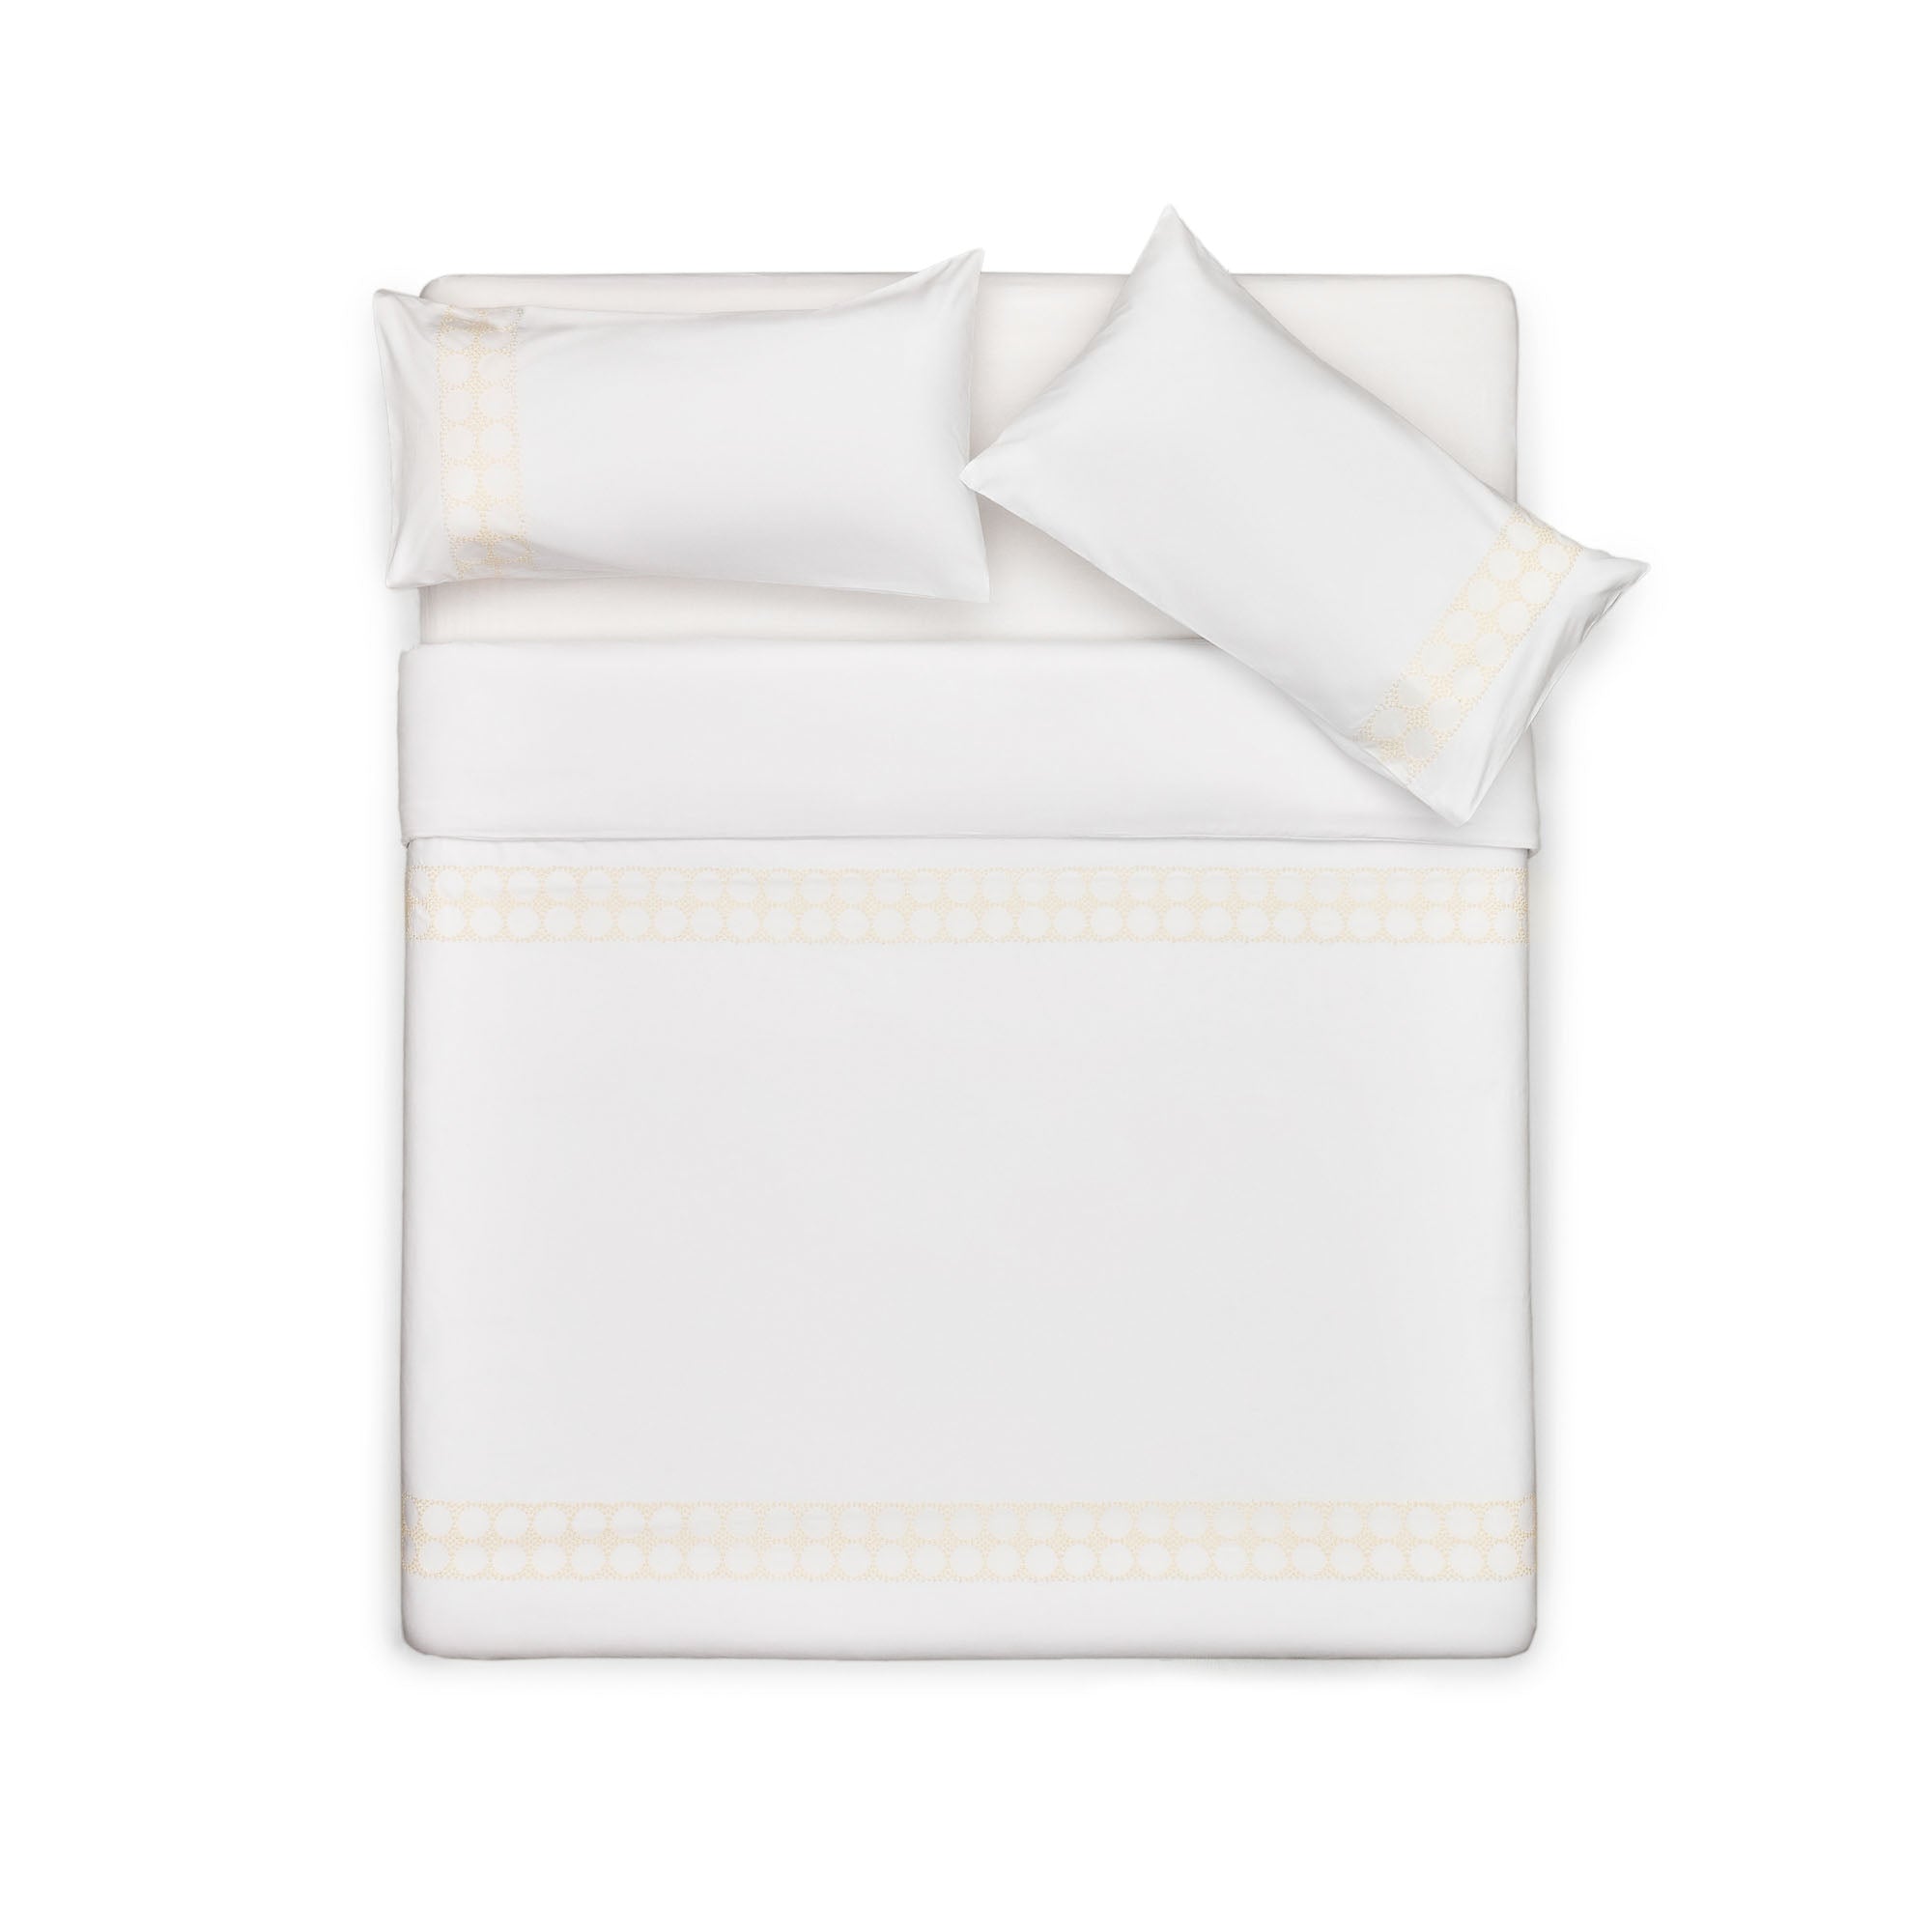 Teia cotton percale duvet cover and pillowcase set in white with floral embroidery, 180x200cm